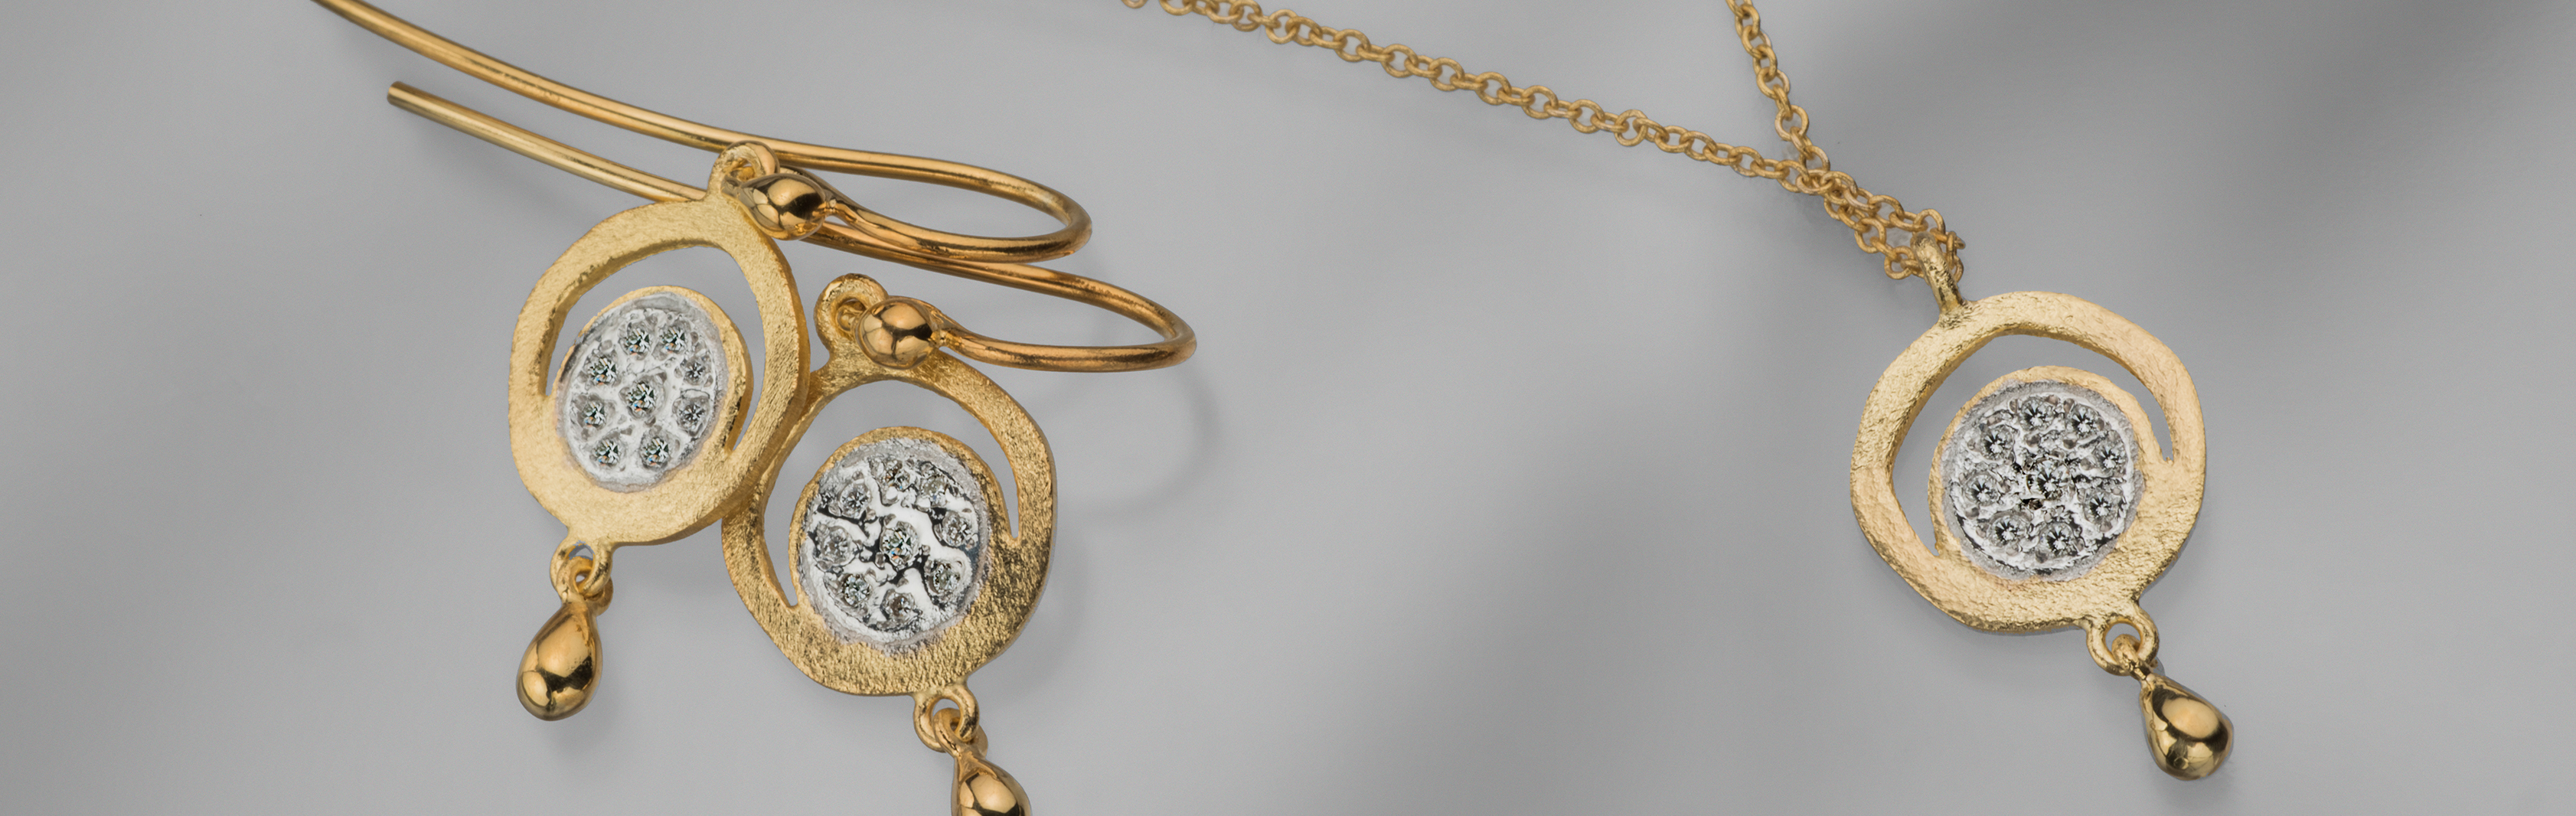 A Drop of Diamond Collection | 14K Gold and Diamond Jewelry